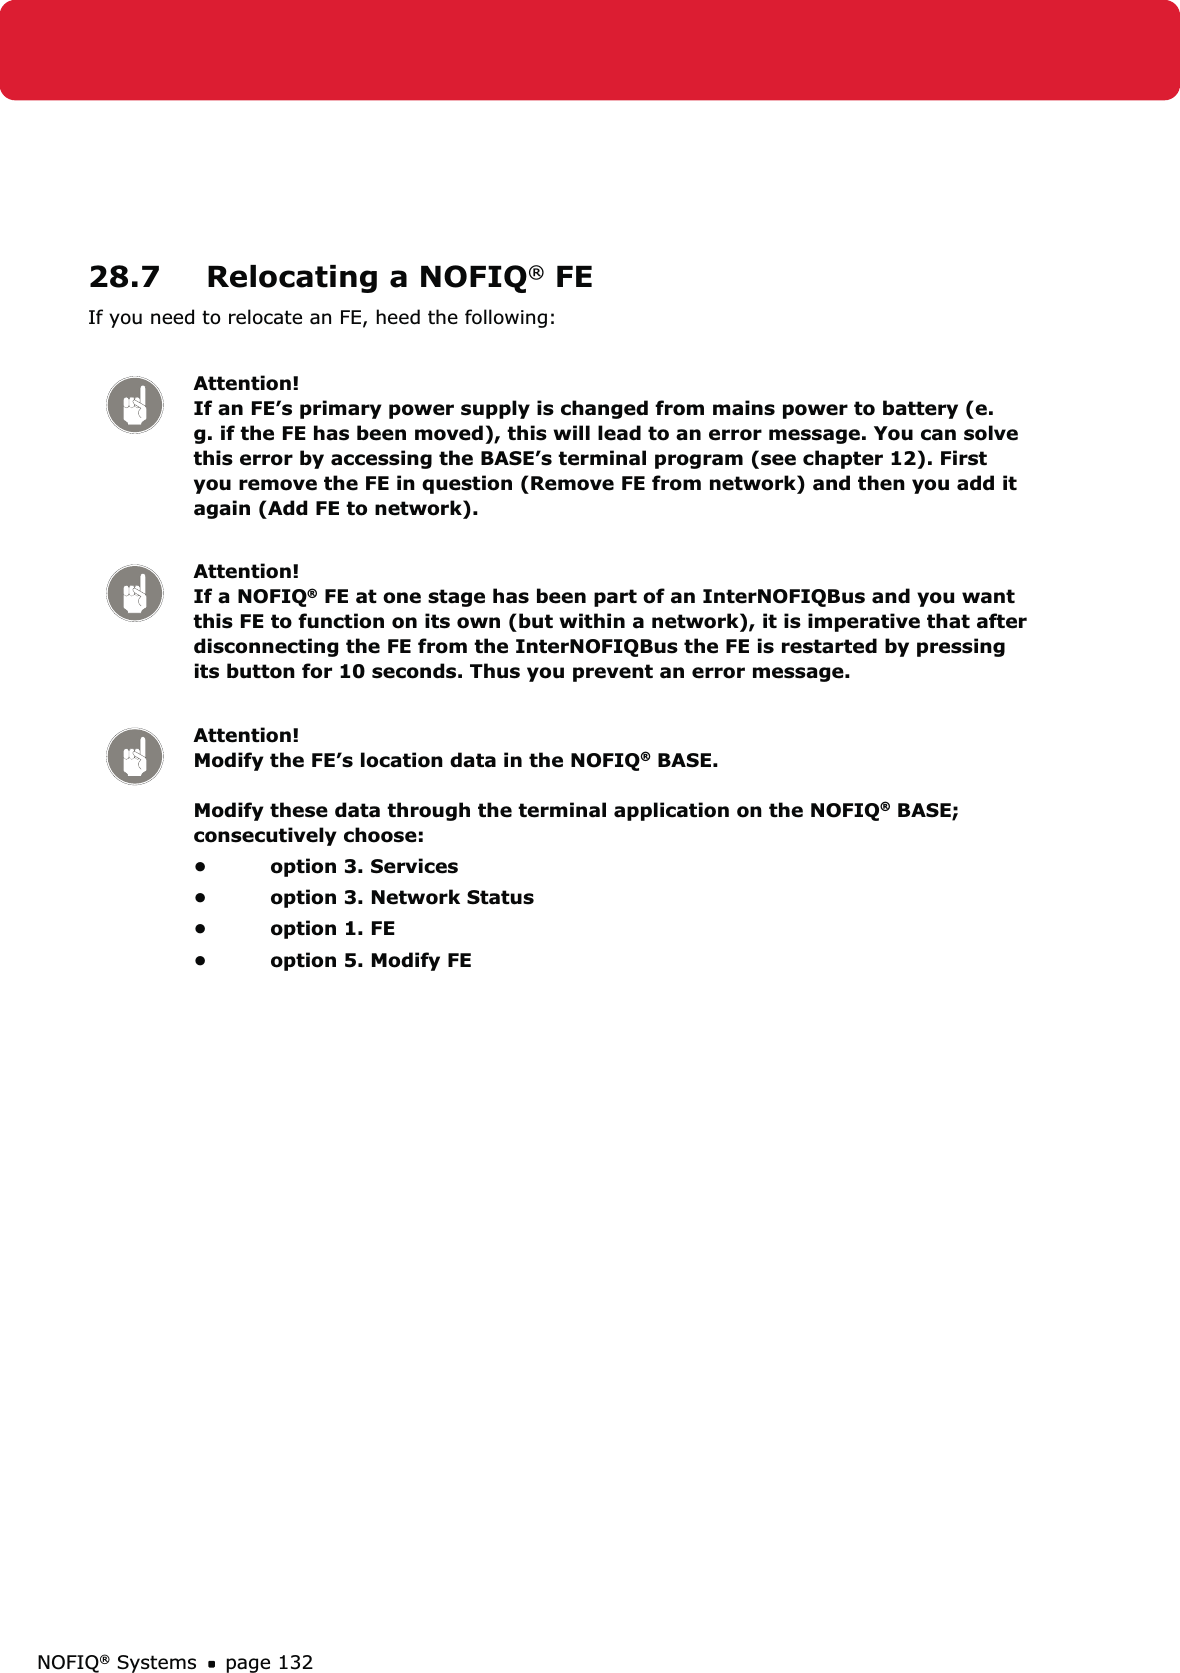 NOFIQ® Systems page 13228.7  Relocating a NOFIQ® FEIf you need to relocate an FE, heed the following: Attention! If an FE’s primary power supply is changed from mains power to battery (e.g. if the FE has been moved), this will lead to an error message. You can solve this error by accessing the BASE’s terminal program (see chapter 12). First you remove the FE in question (Remove FE from network) and then you add it again (Add FE to network).Attention! If a NOFIQ® FE at one stage has been part of an InterNOFIQBus and you want this FE to function on its own (but within a network), it is imperative that after disconnecting the FE from the InterNOFIQBus the FE is restarted by pressing its button for 10 seconds. Thus you prevent an error message.Attention! Modify the FE’s location data in the NOFIQ® BASE.  Modify these data through the terminal application on the NOFIQ® BASE; consecutively choose:option 3. Services• option 3. Network Status• option 1. FE• option 5. Modify FE• 